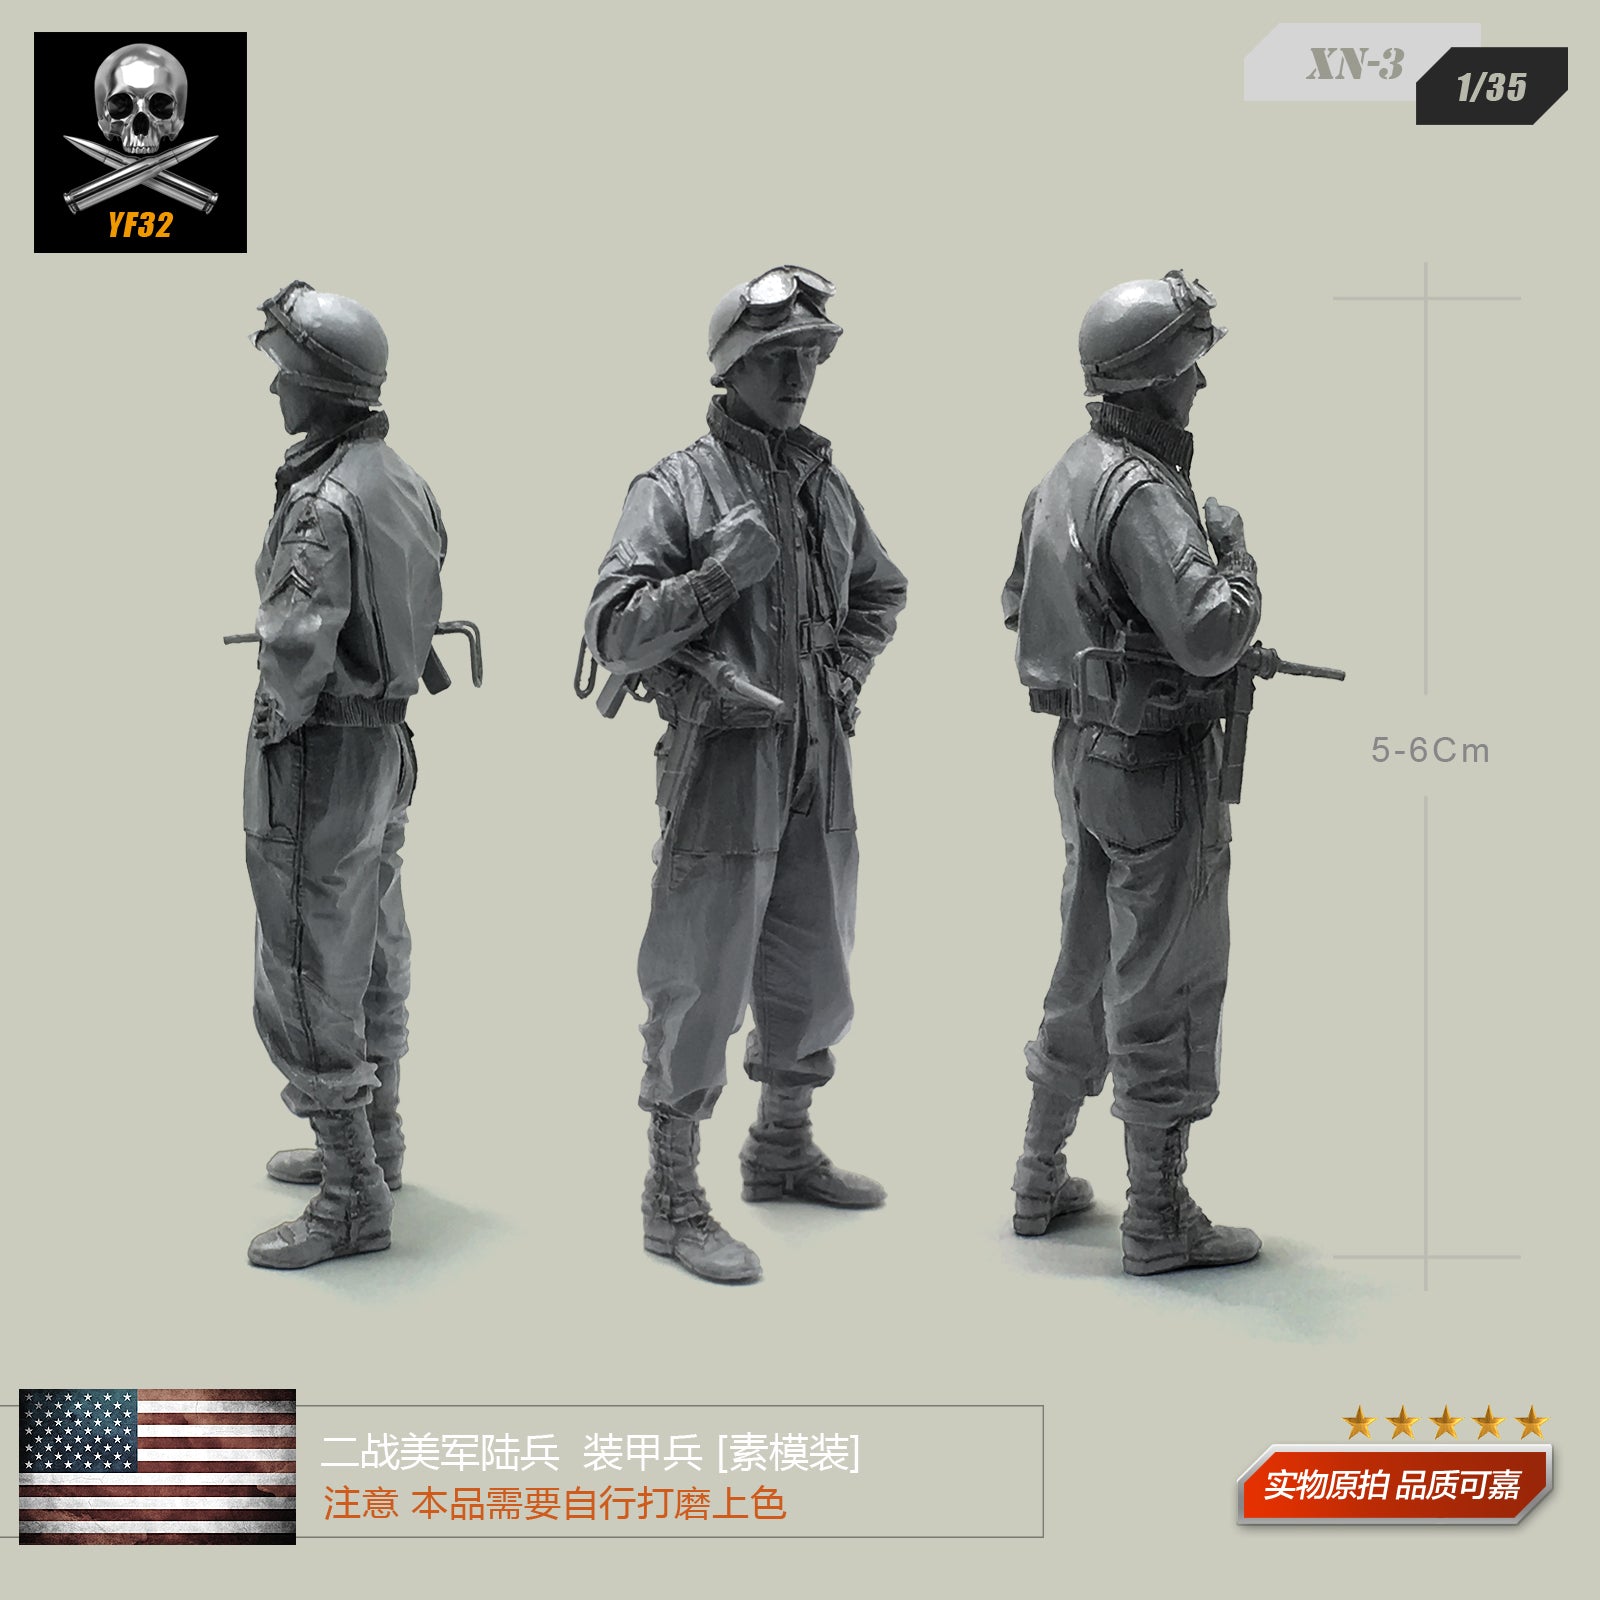 1/35 World War II US Army Army soldiers armored soldiers resin soldiers element model XN-3